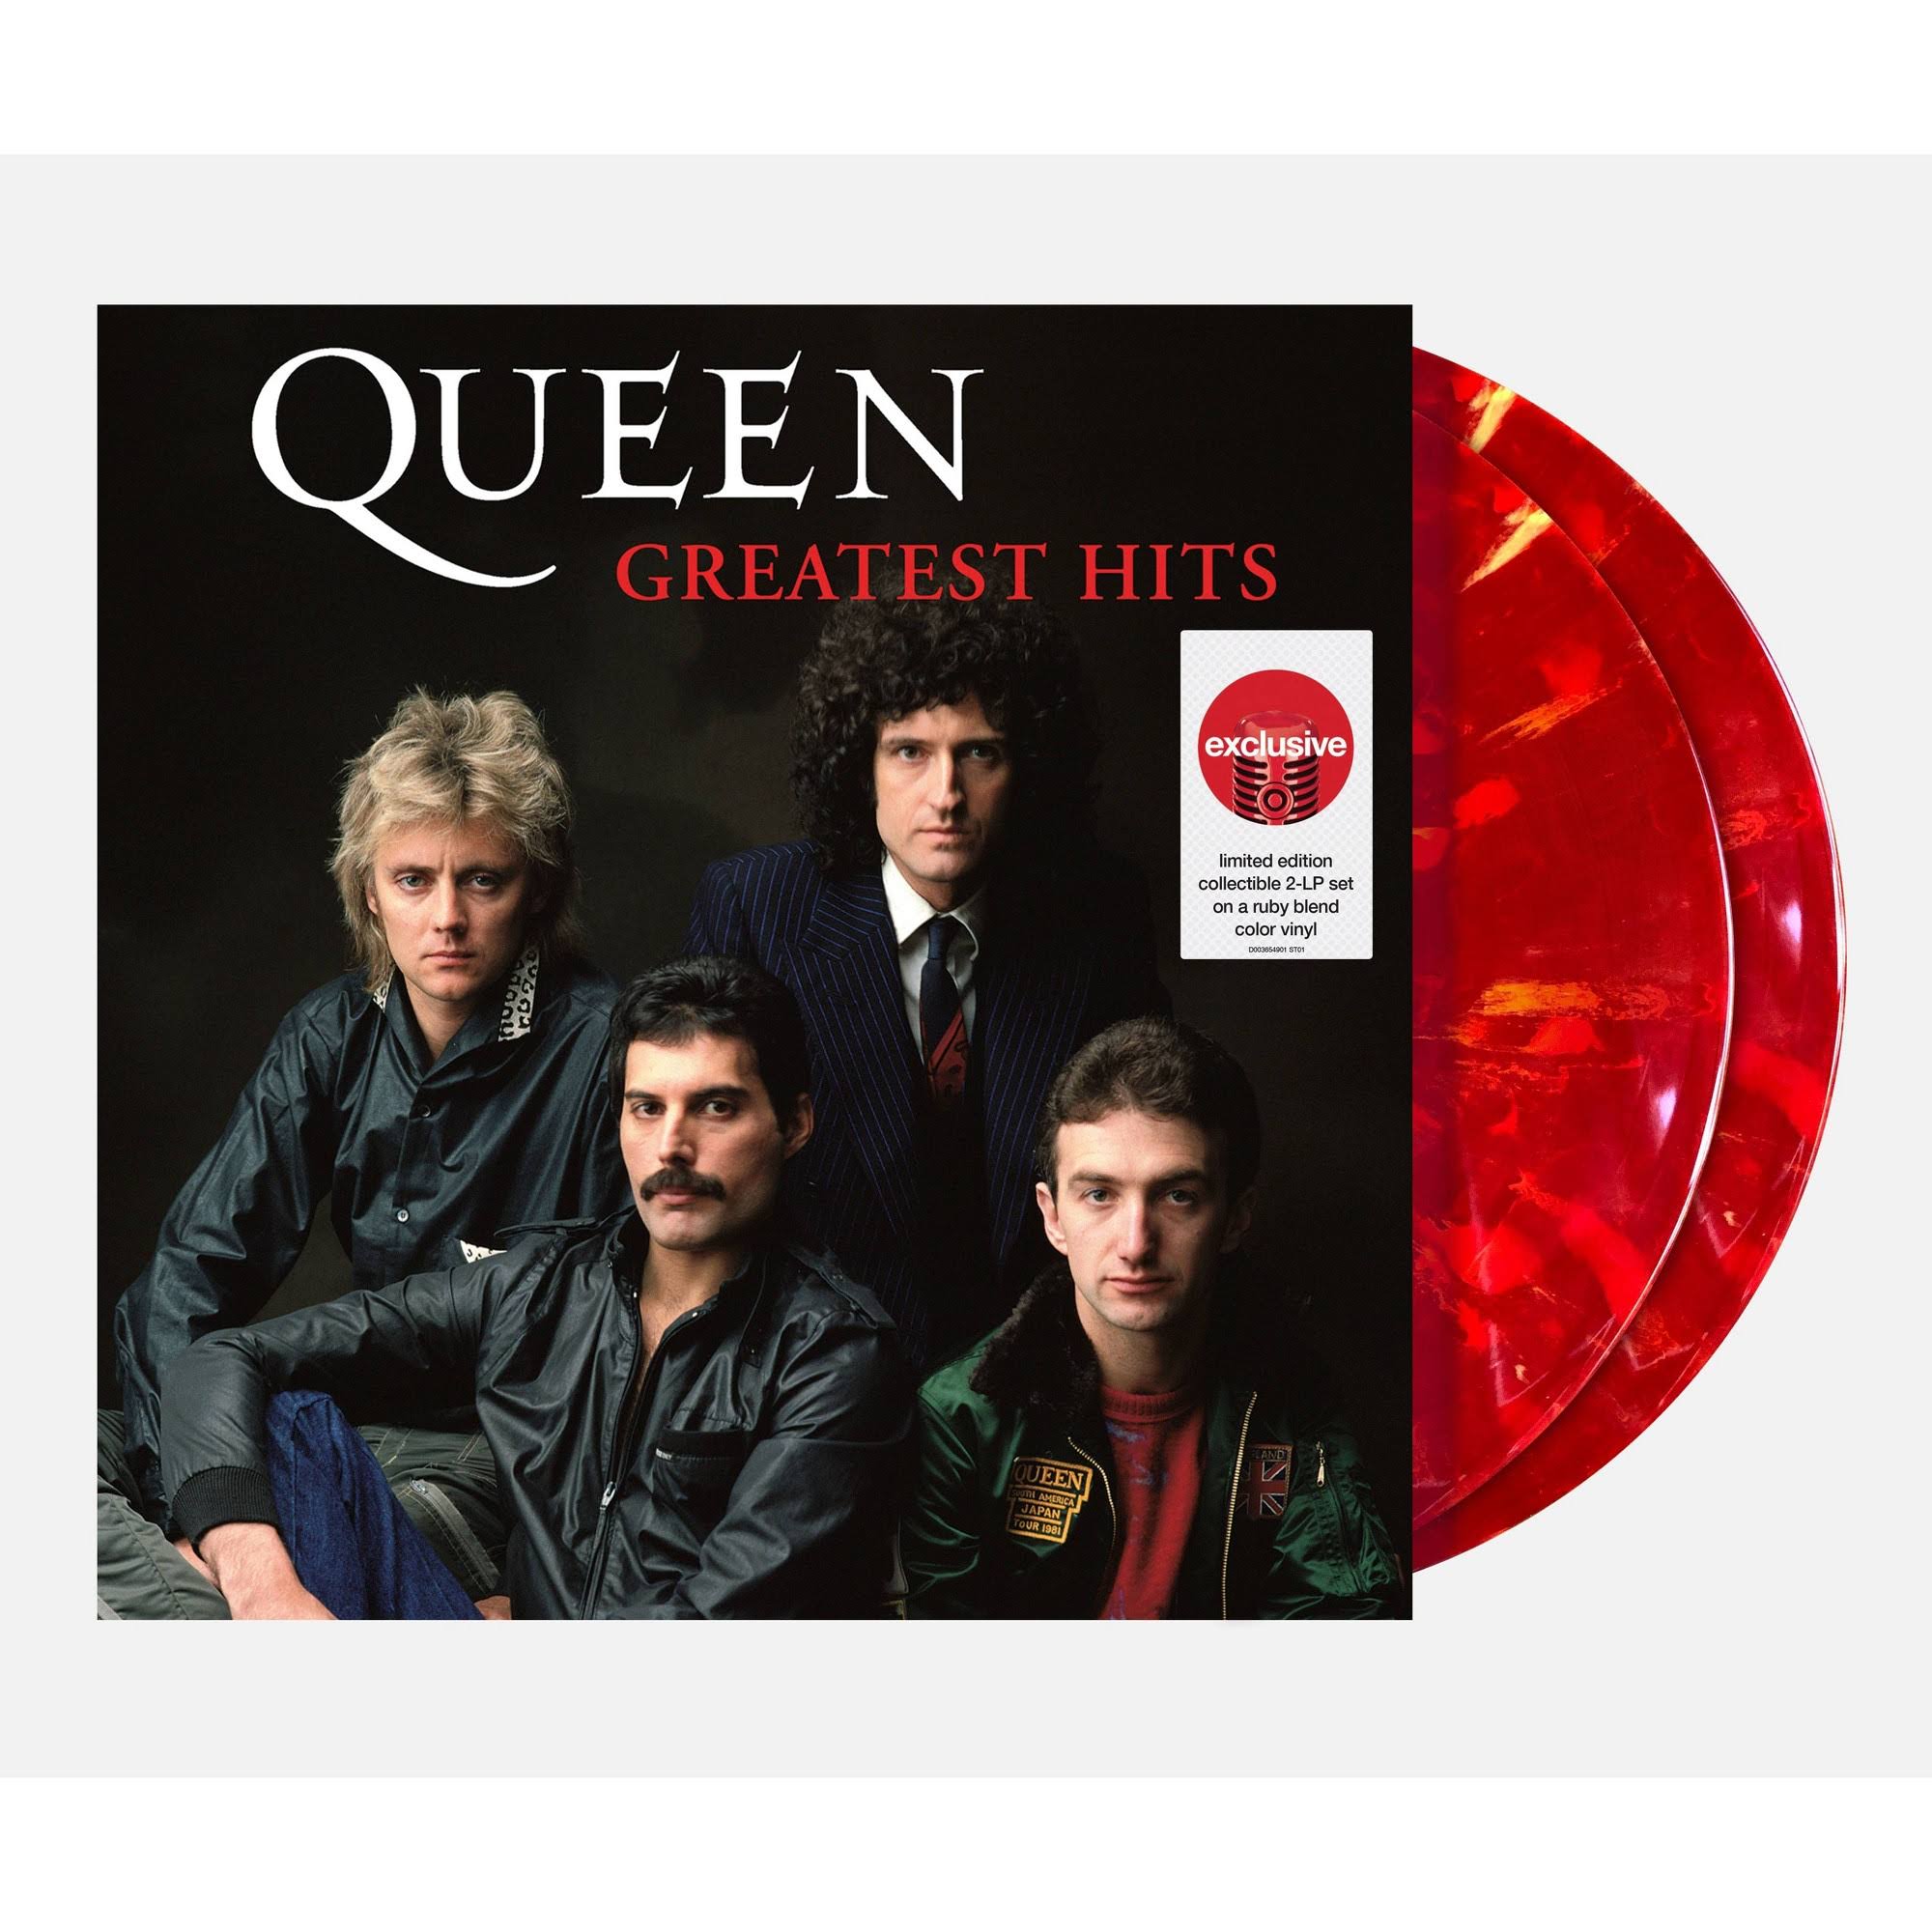 Queen Greatest Hits: Target exclusive - Red Vinyl - Sealed 2020 USA